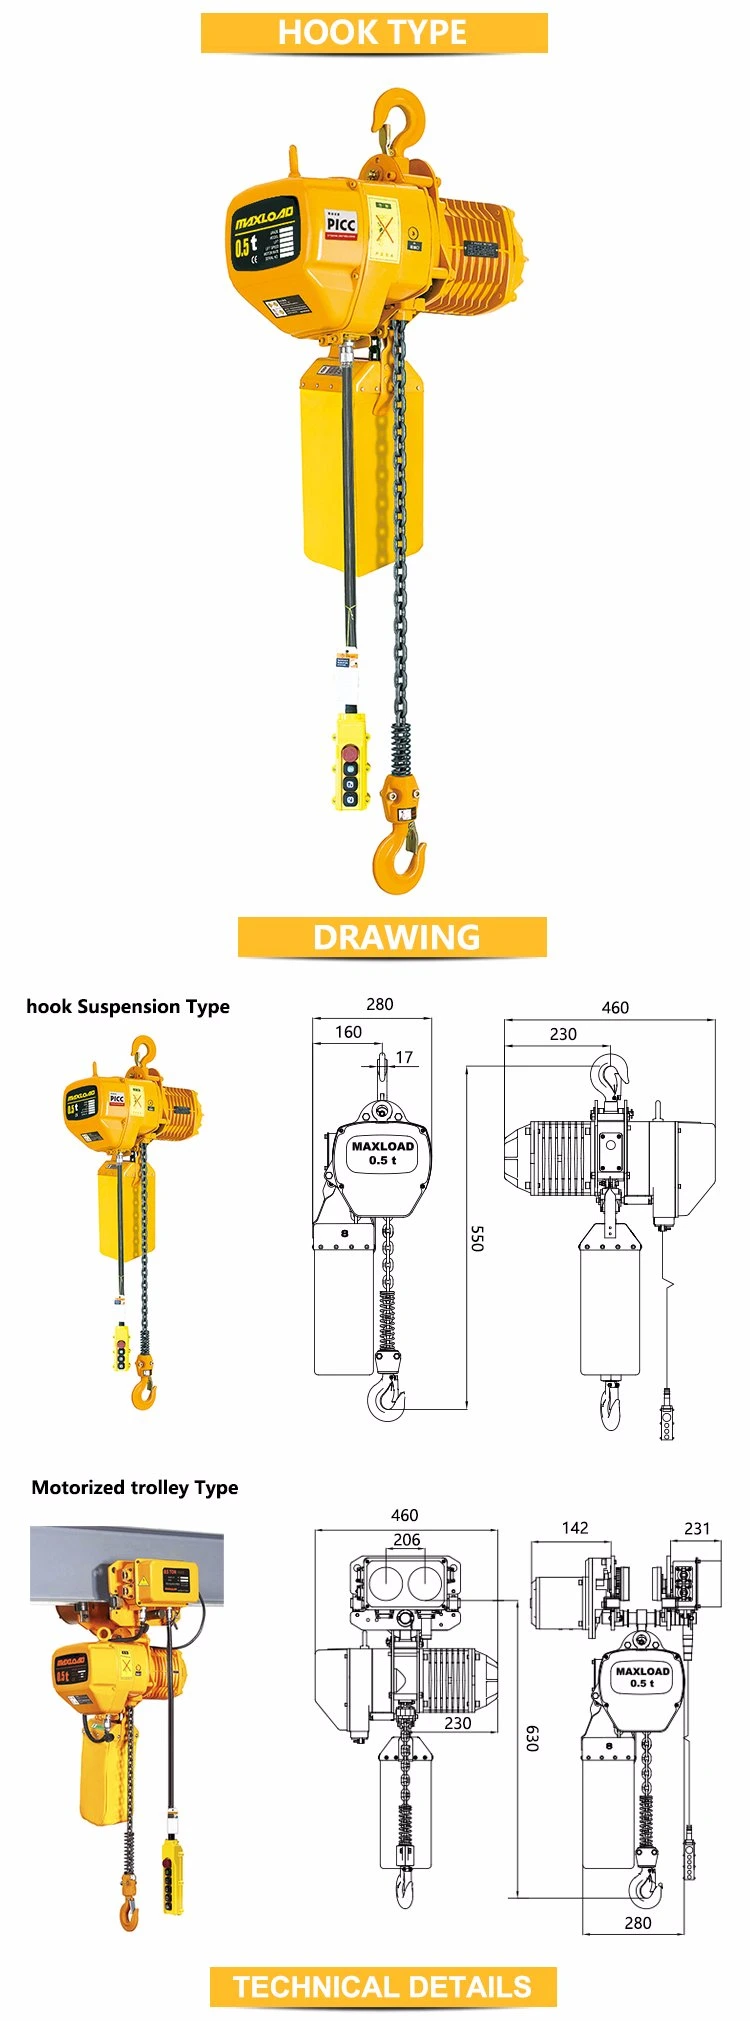 Fixed Model 0.5t Electric Chain Hoist for Sale